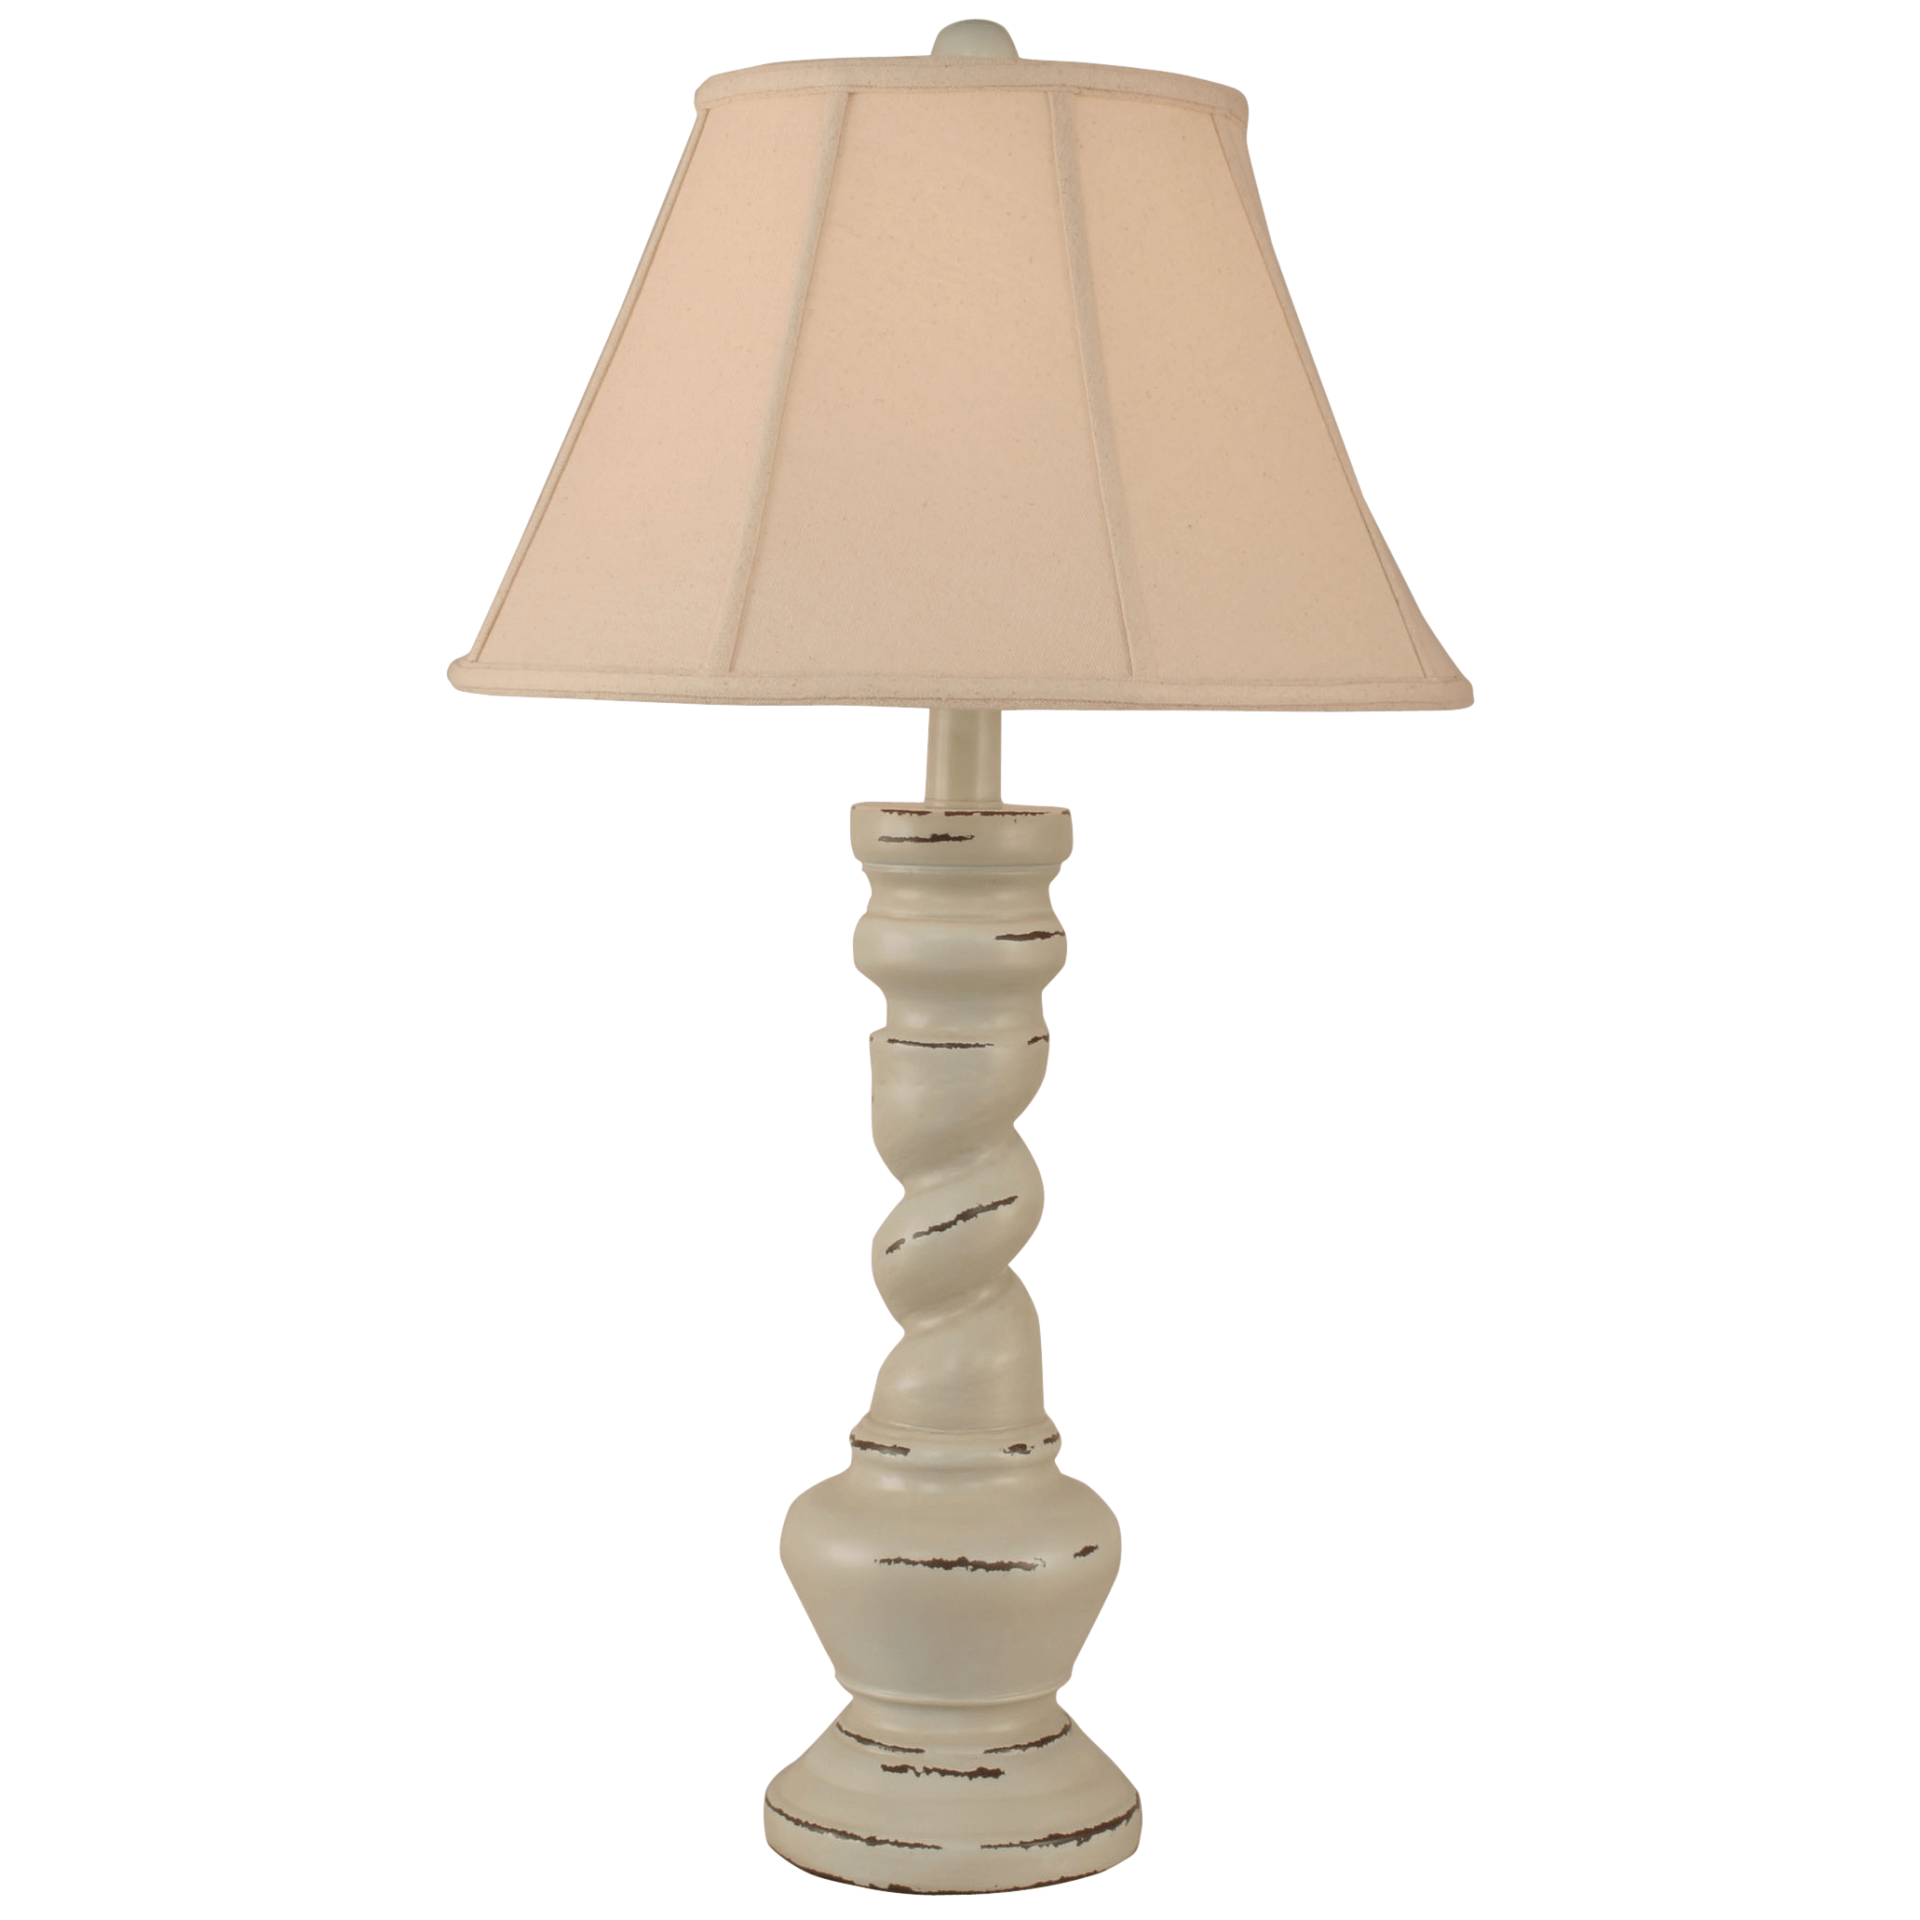 Country Twist Table Lamp